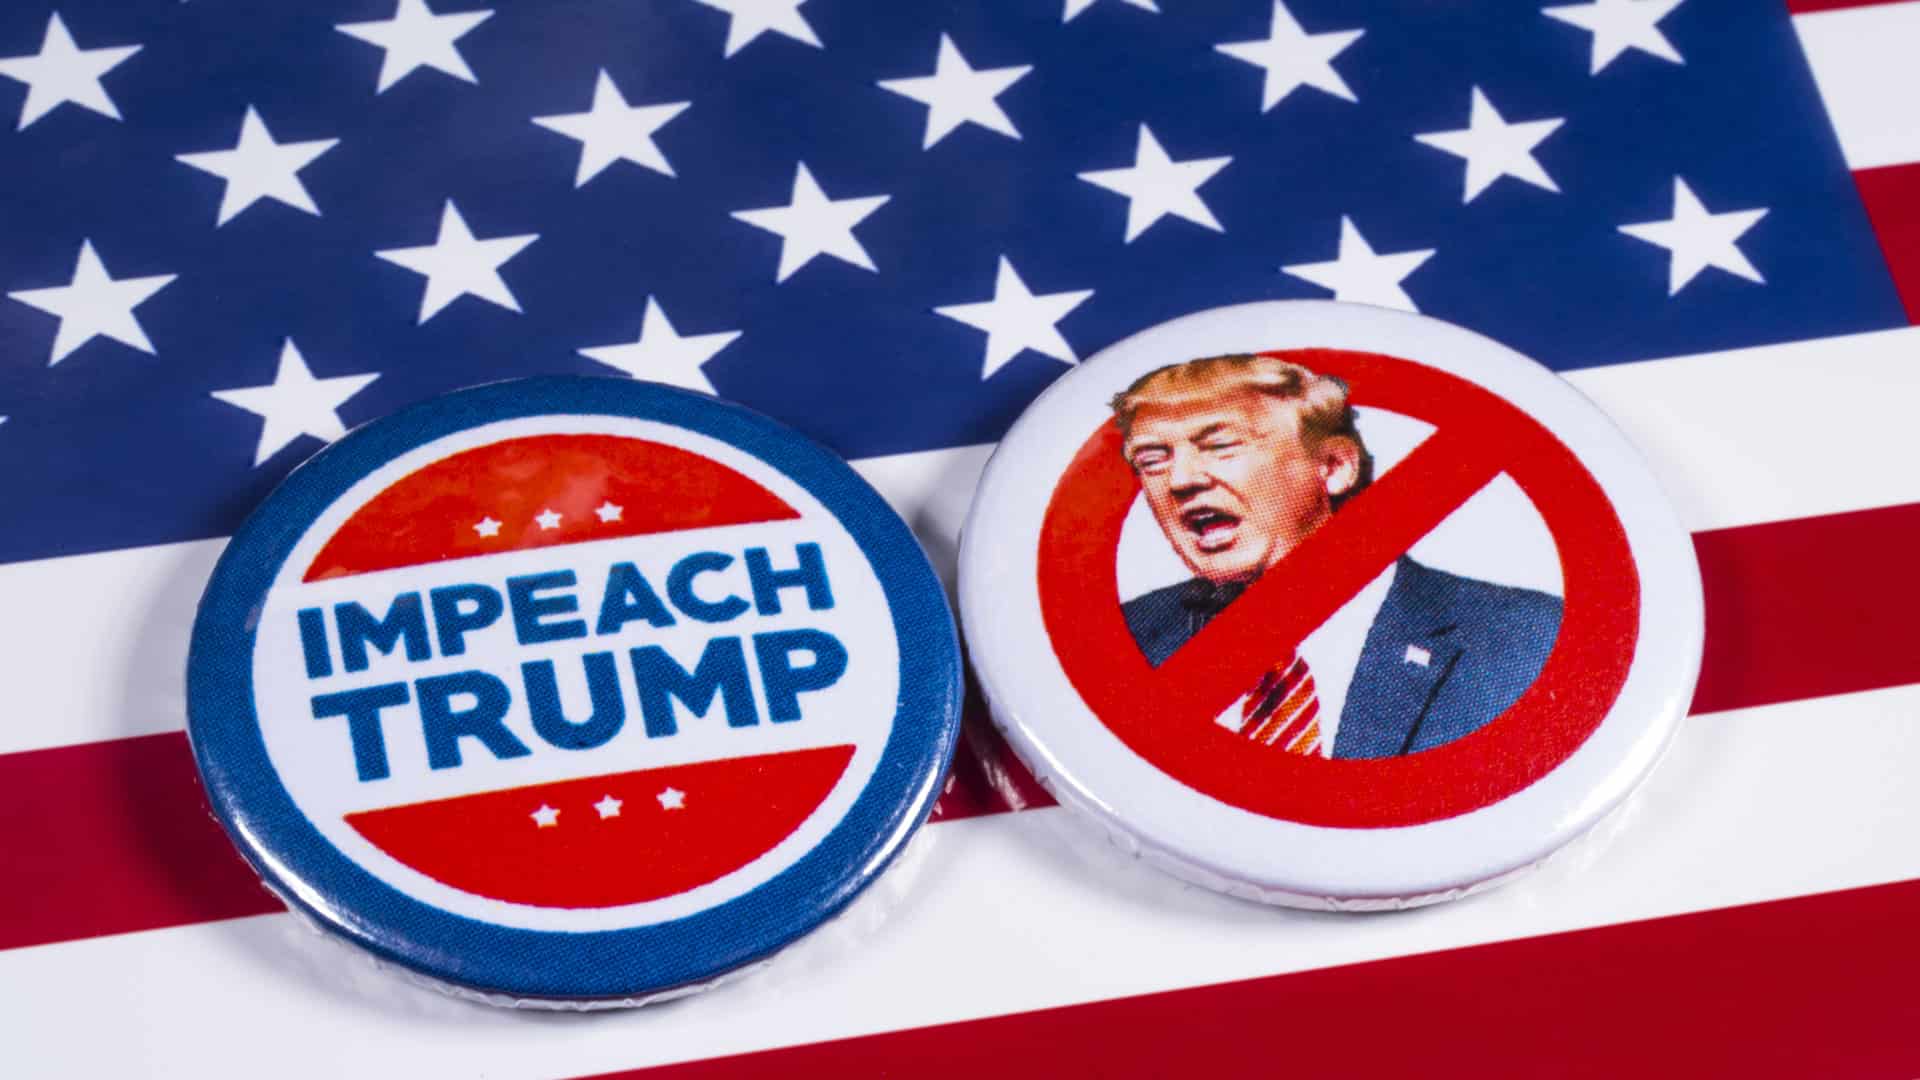 Anti-Tump badges over an American flag background.